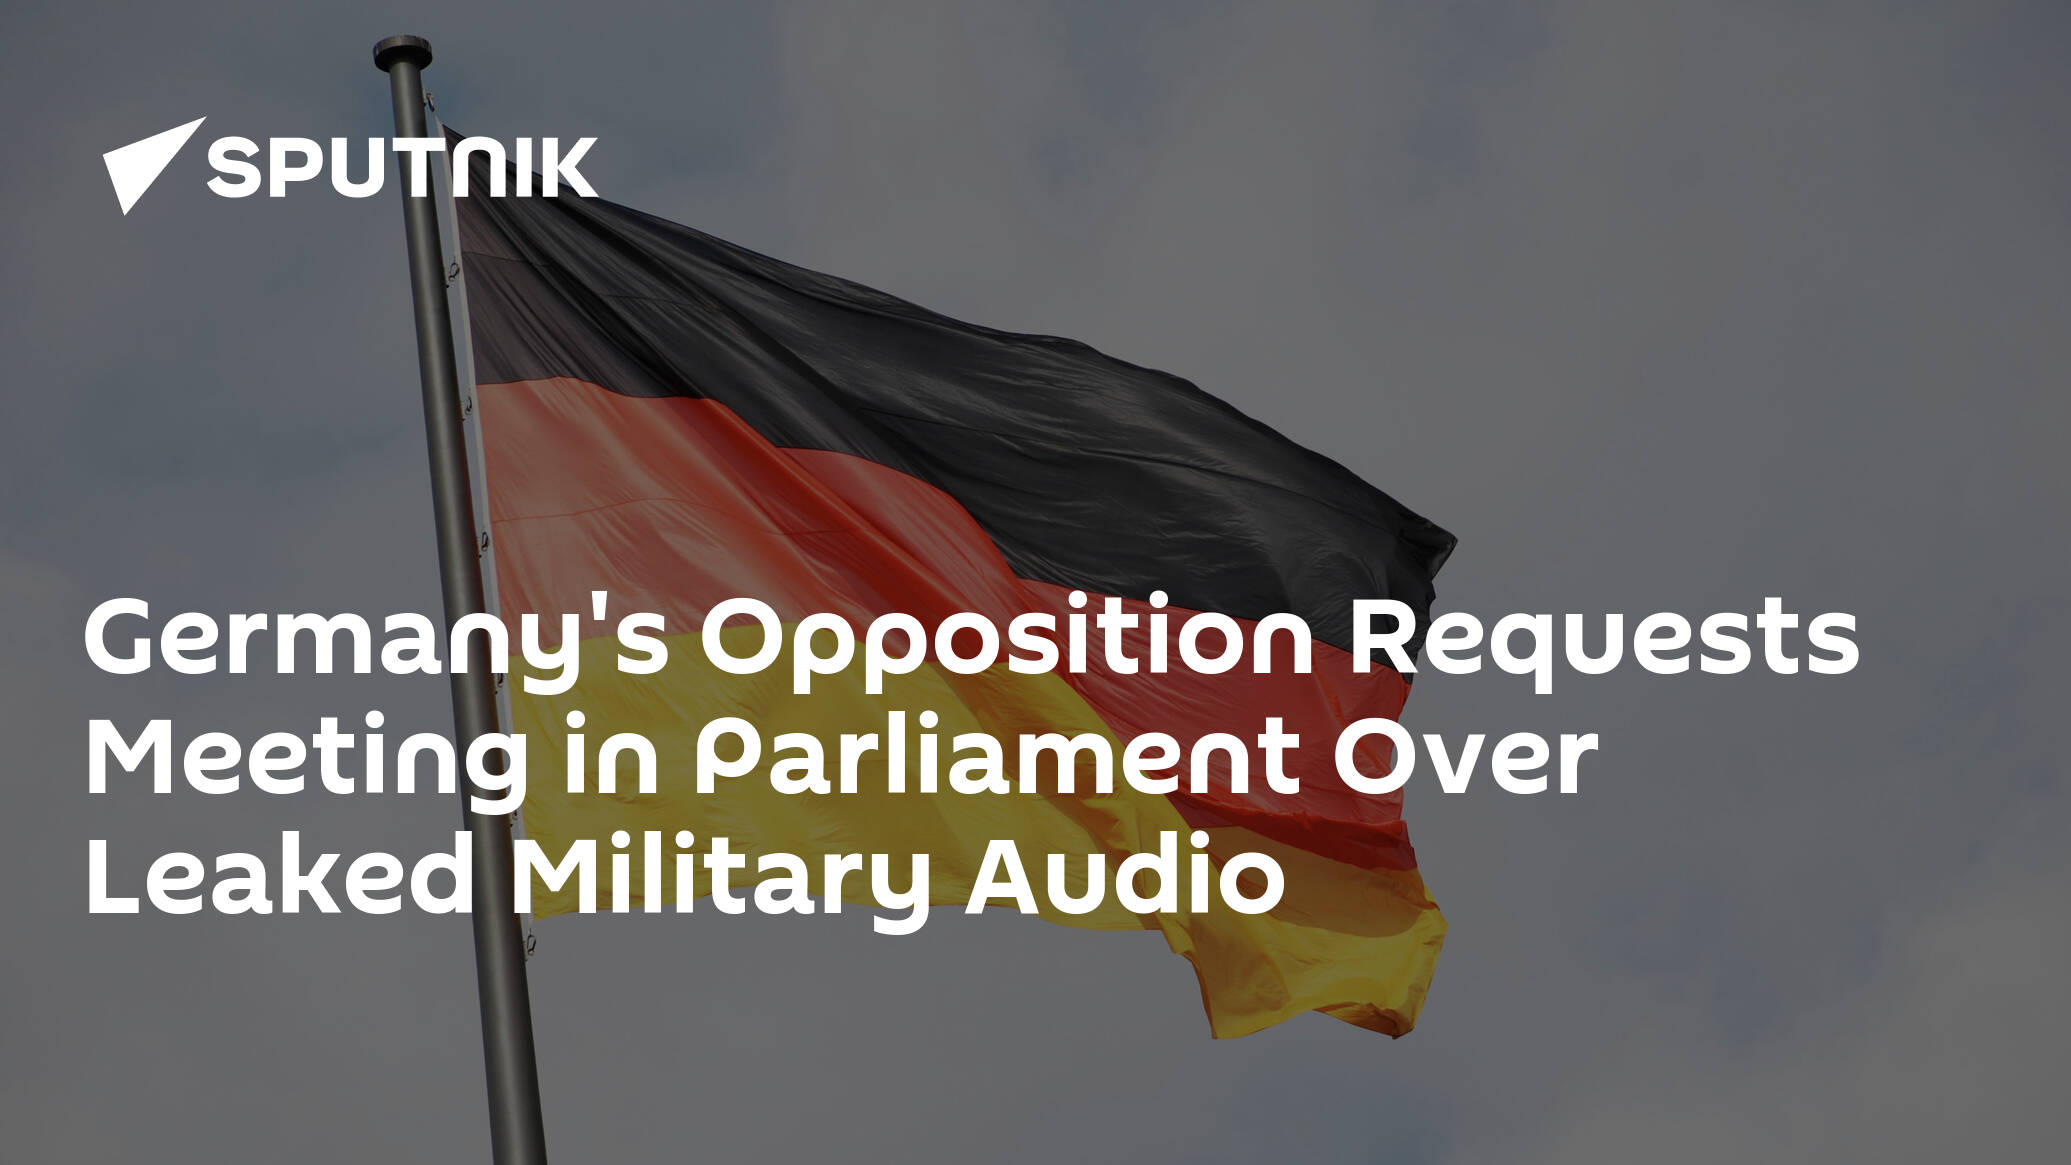 Germany's Opposition Requests Meeting in Parliament Over Leaked Military Audio – Secretary